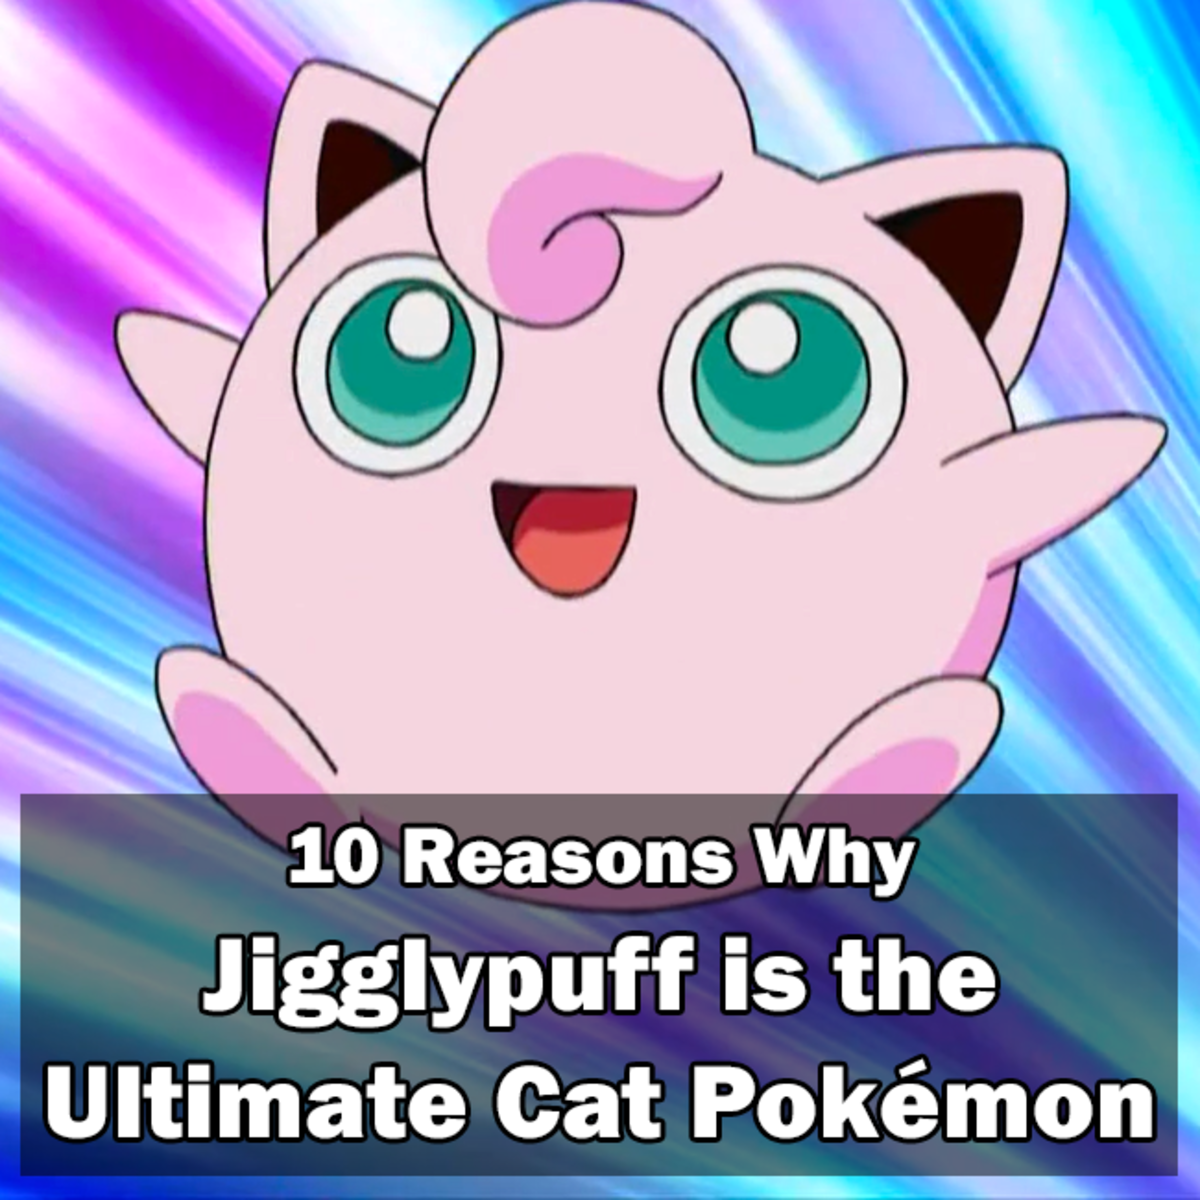 10 Reasons Why Jigglypuff Is the Ultimate Cat Pokémon